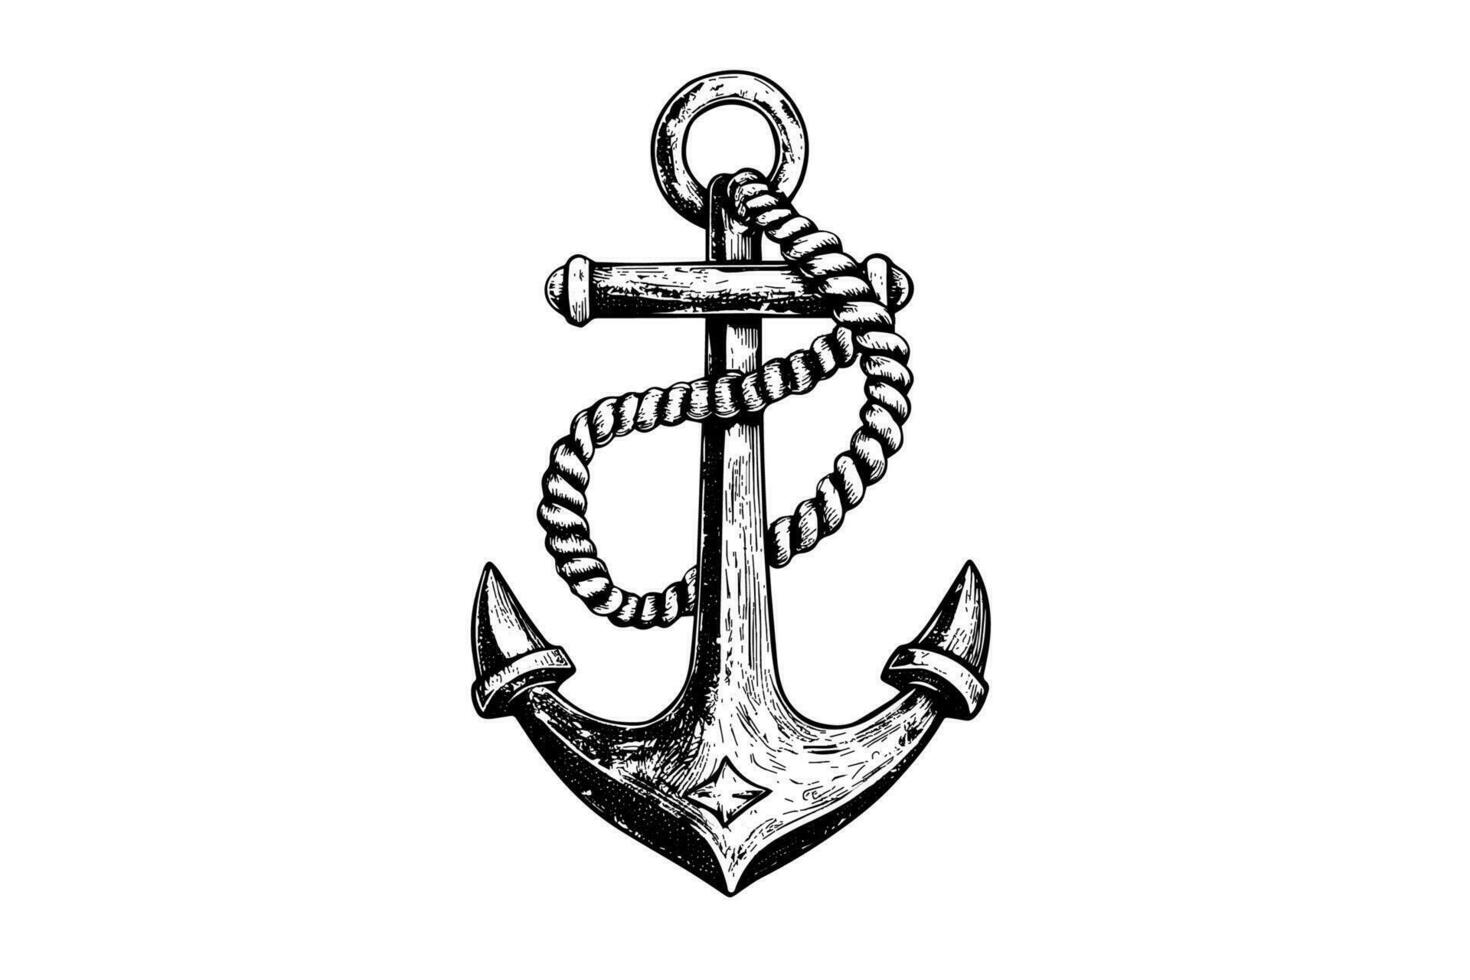 Ship sea anchor and rope in vintage engraving style. Sketch hand drawn vector illustration.